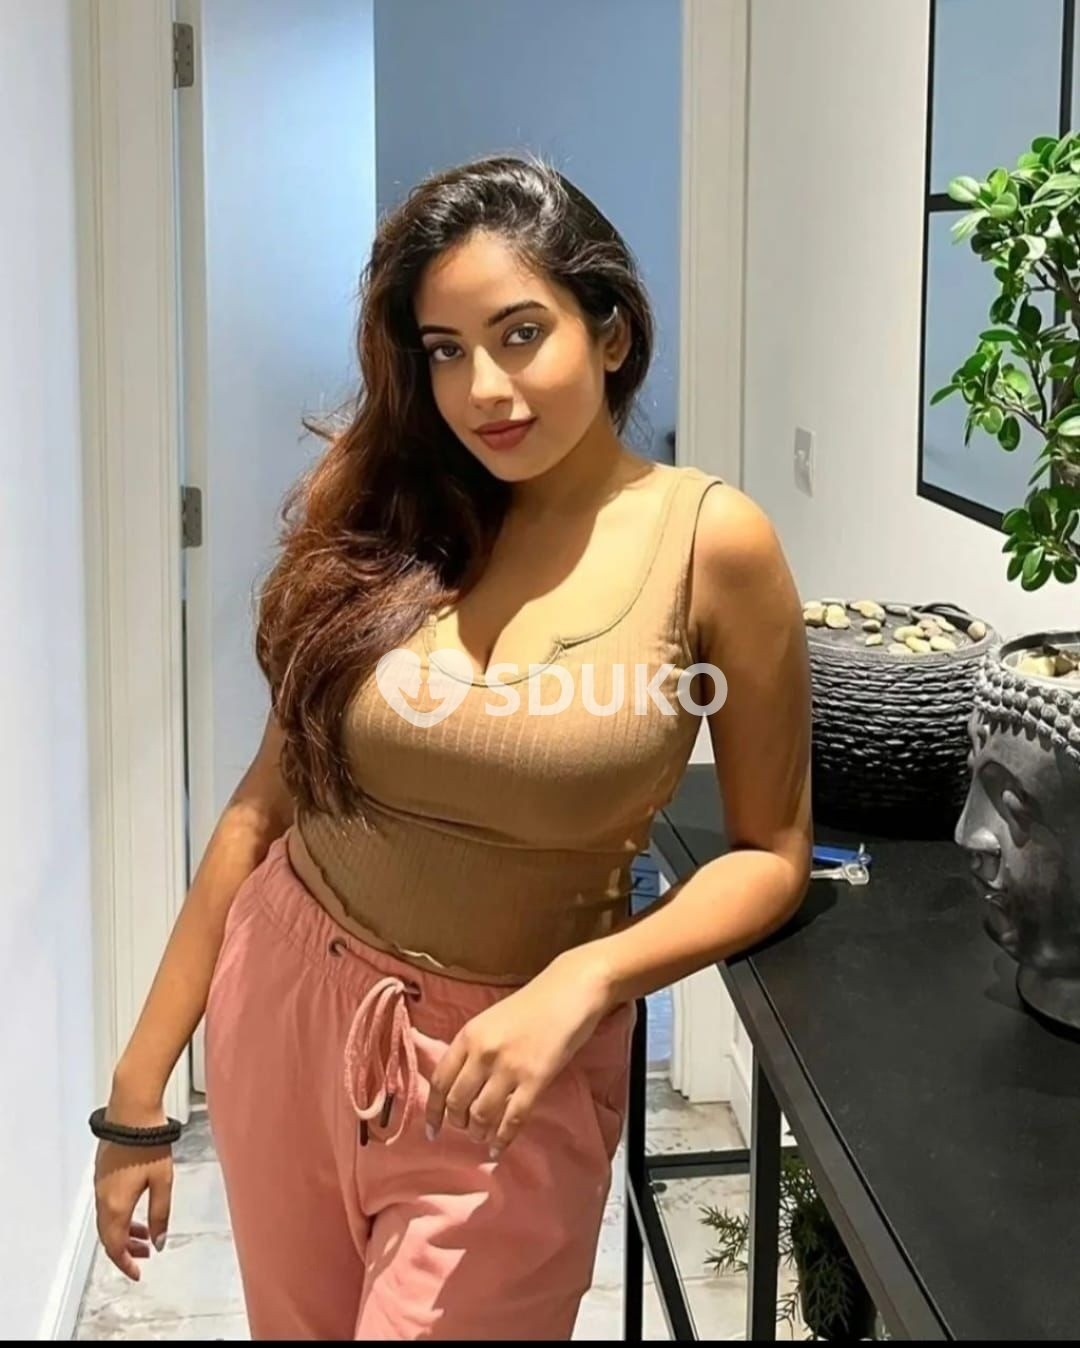 Delhi (Nehru place)24 hours service available ❤️𝐁𝐄𝐒𝐓 𝐂𝐀𝐋𝐋 𝐆𝐈𝐑𝐋 HIGH PROFILE mode